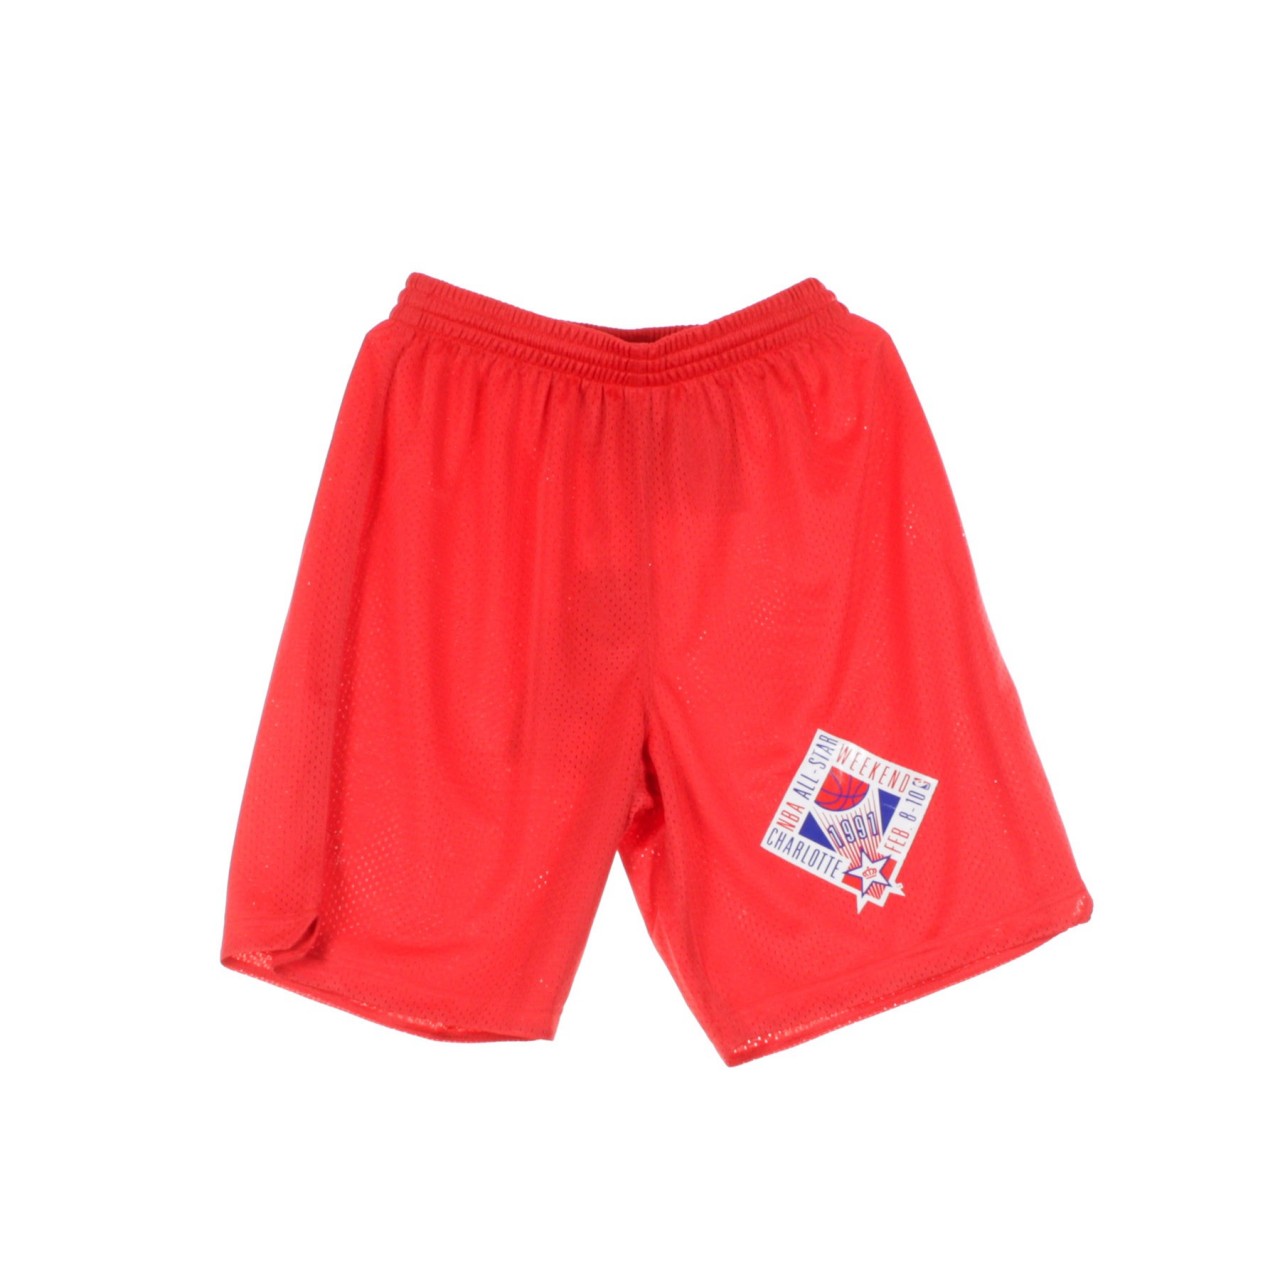 MITCHELL & NESS PRACTICE SHORTS ALL STAR GAME 91 APSHGS18004-ASGSCAR91